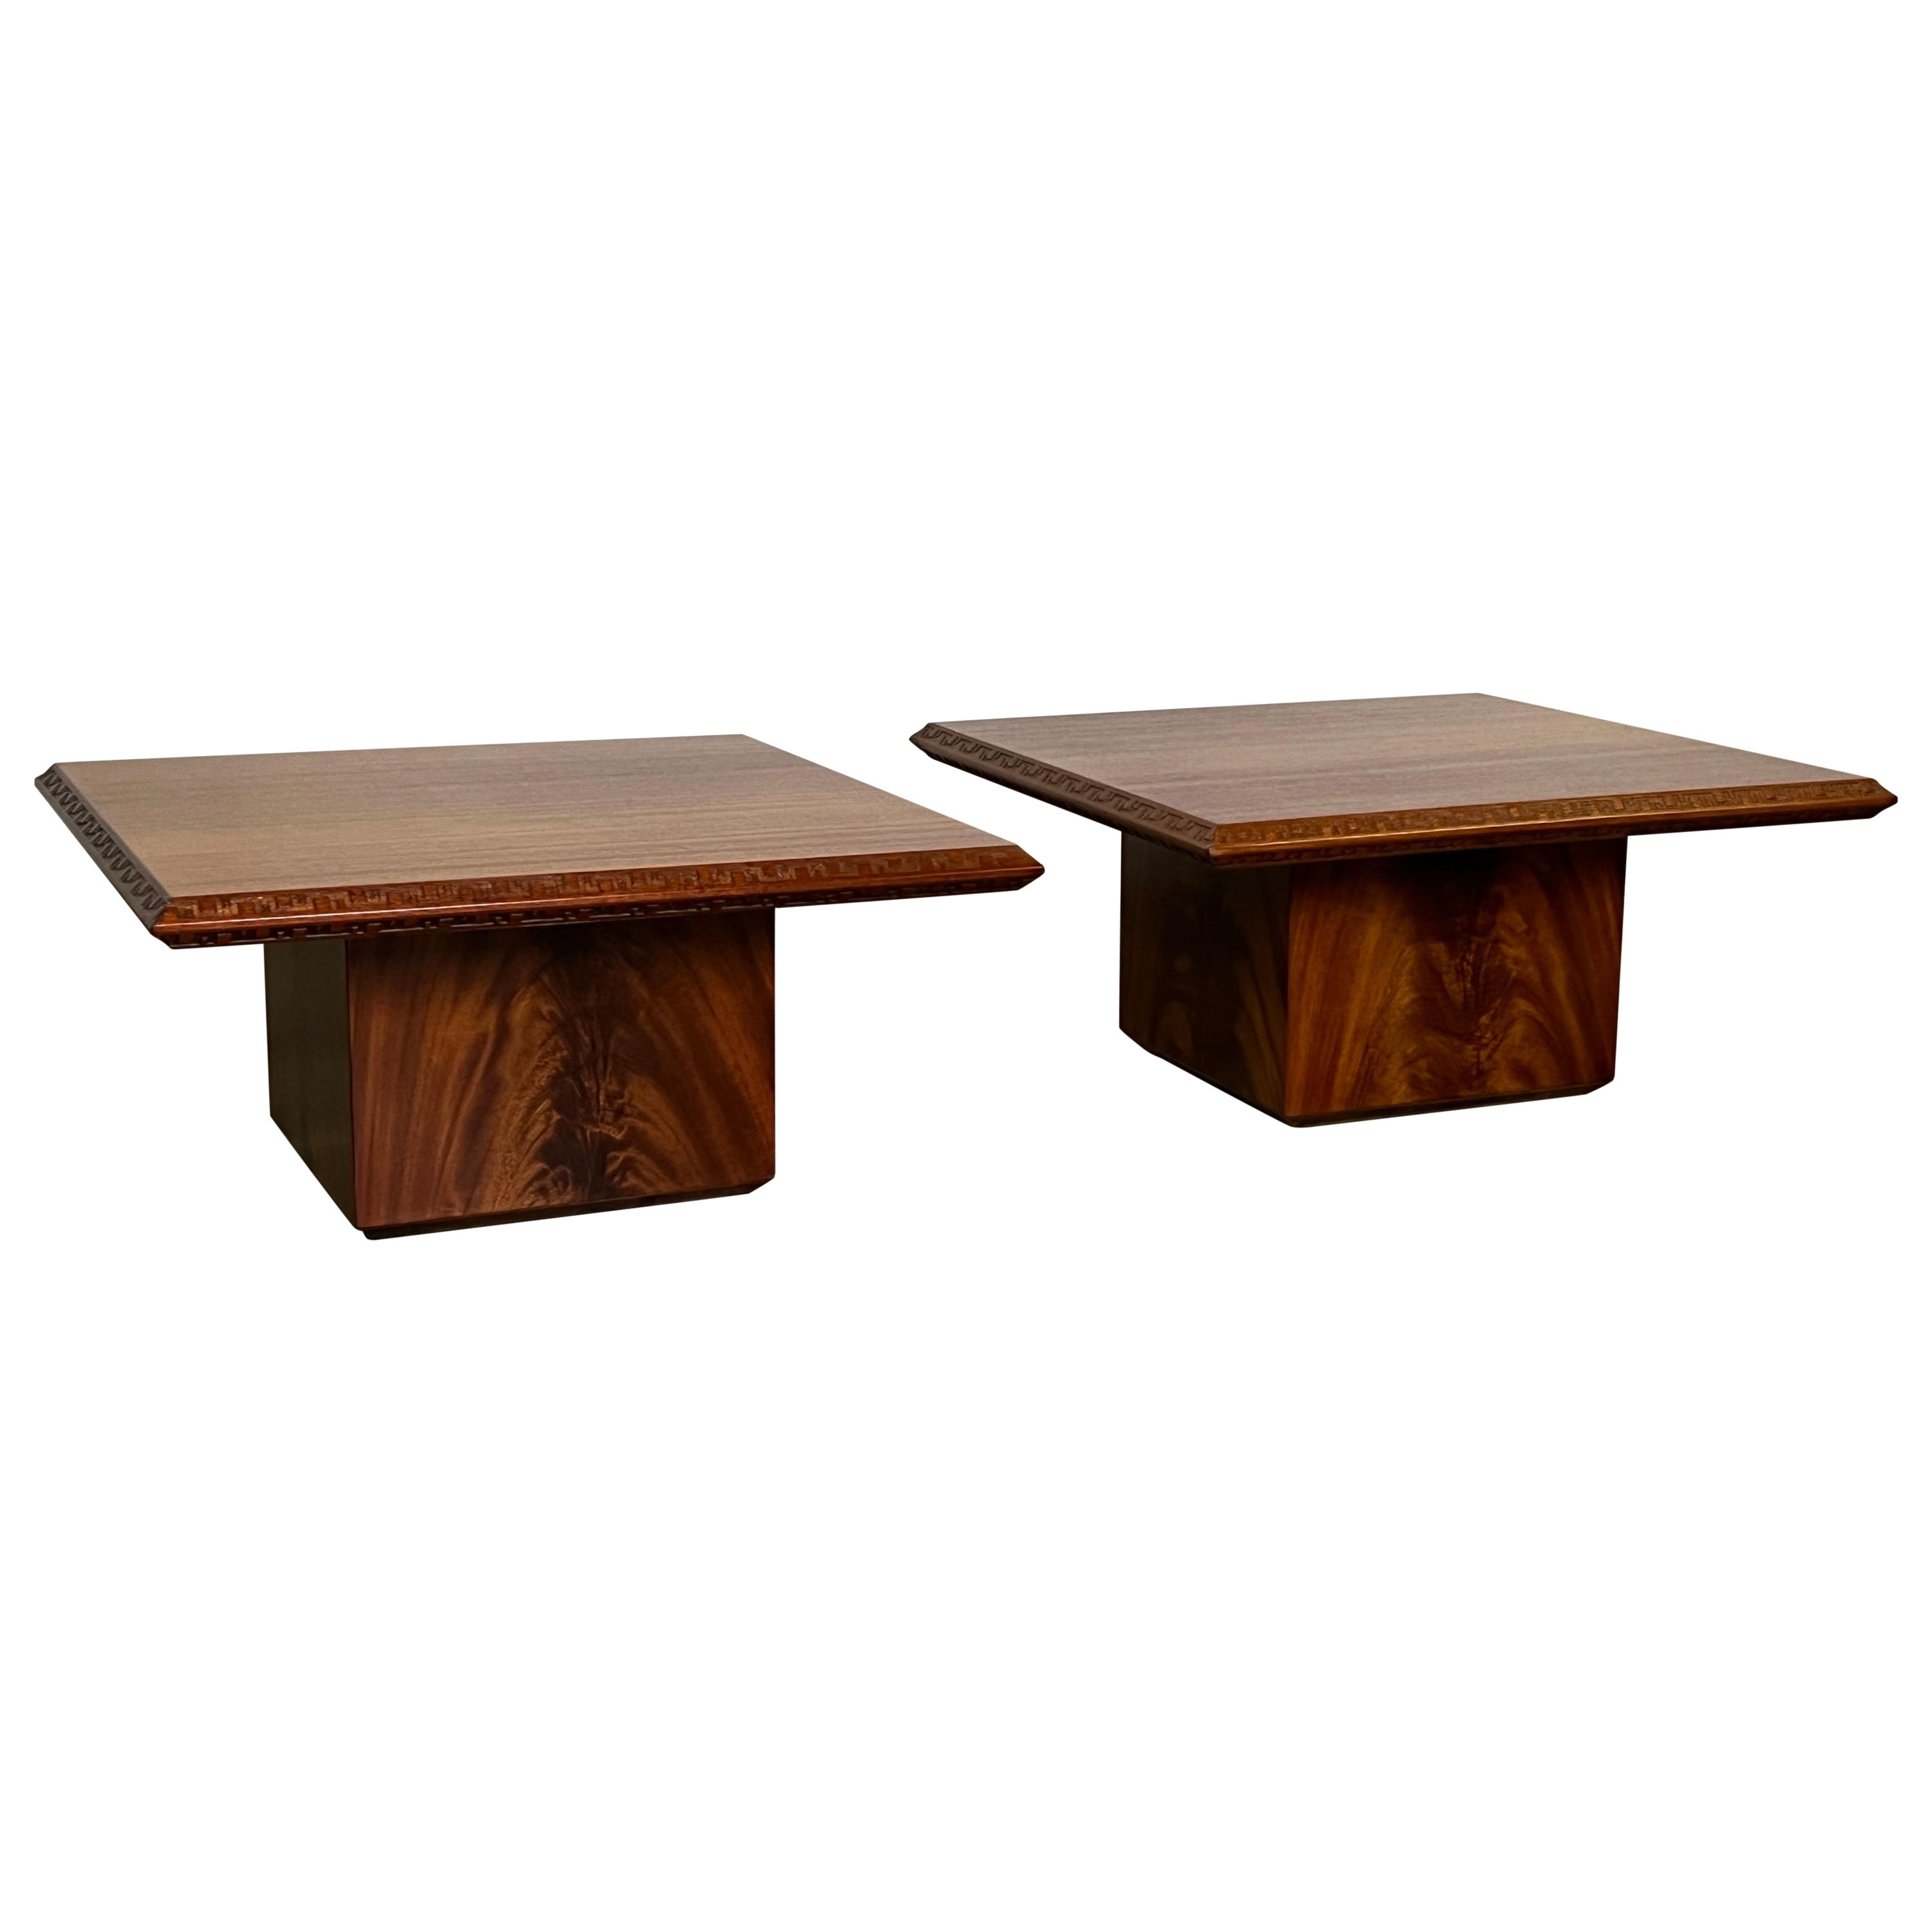 Pair of Tables by Frank Lloyd Wright for Henredon